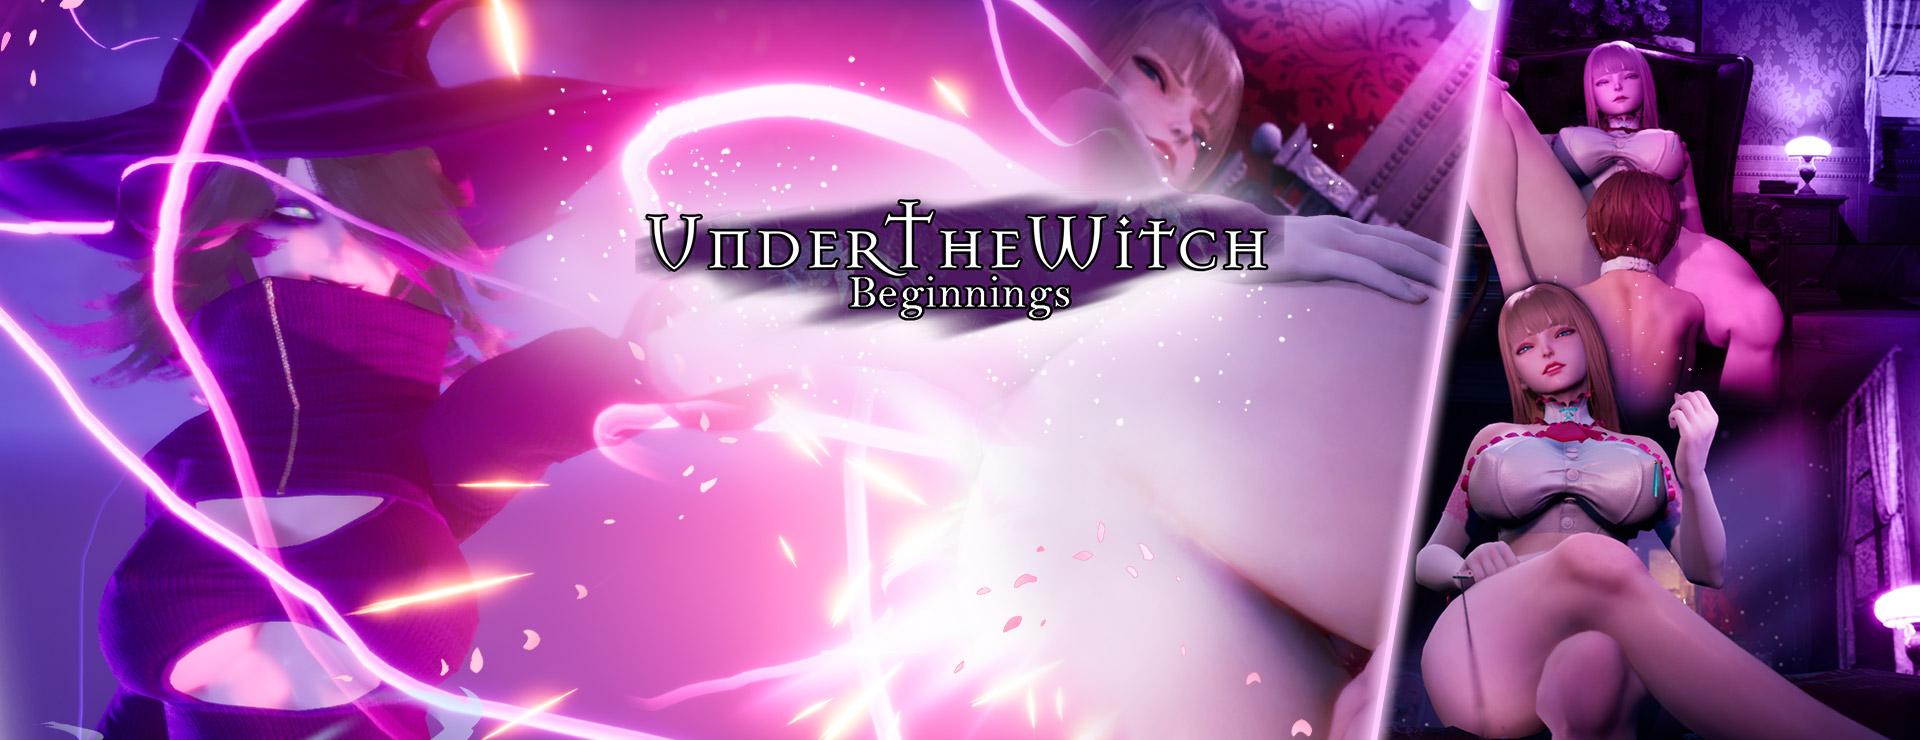 Under The Witch: Beginnings - Action Aventure Jeu